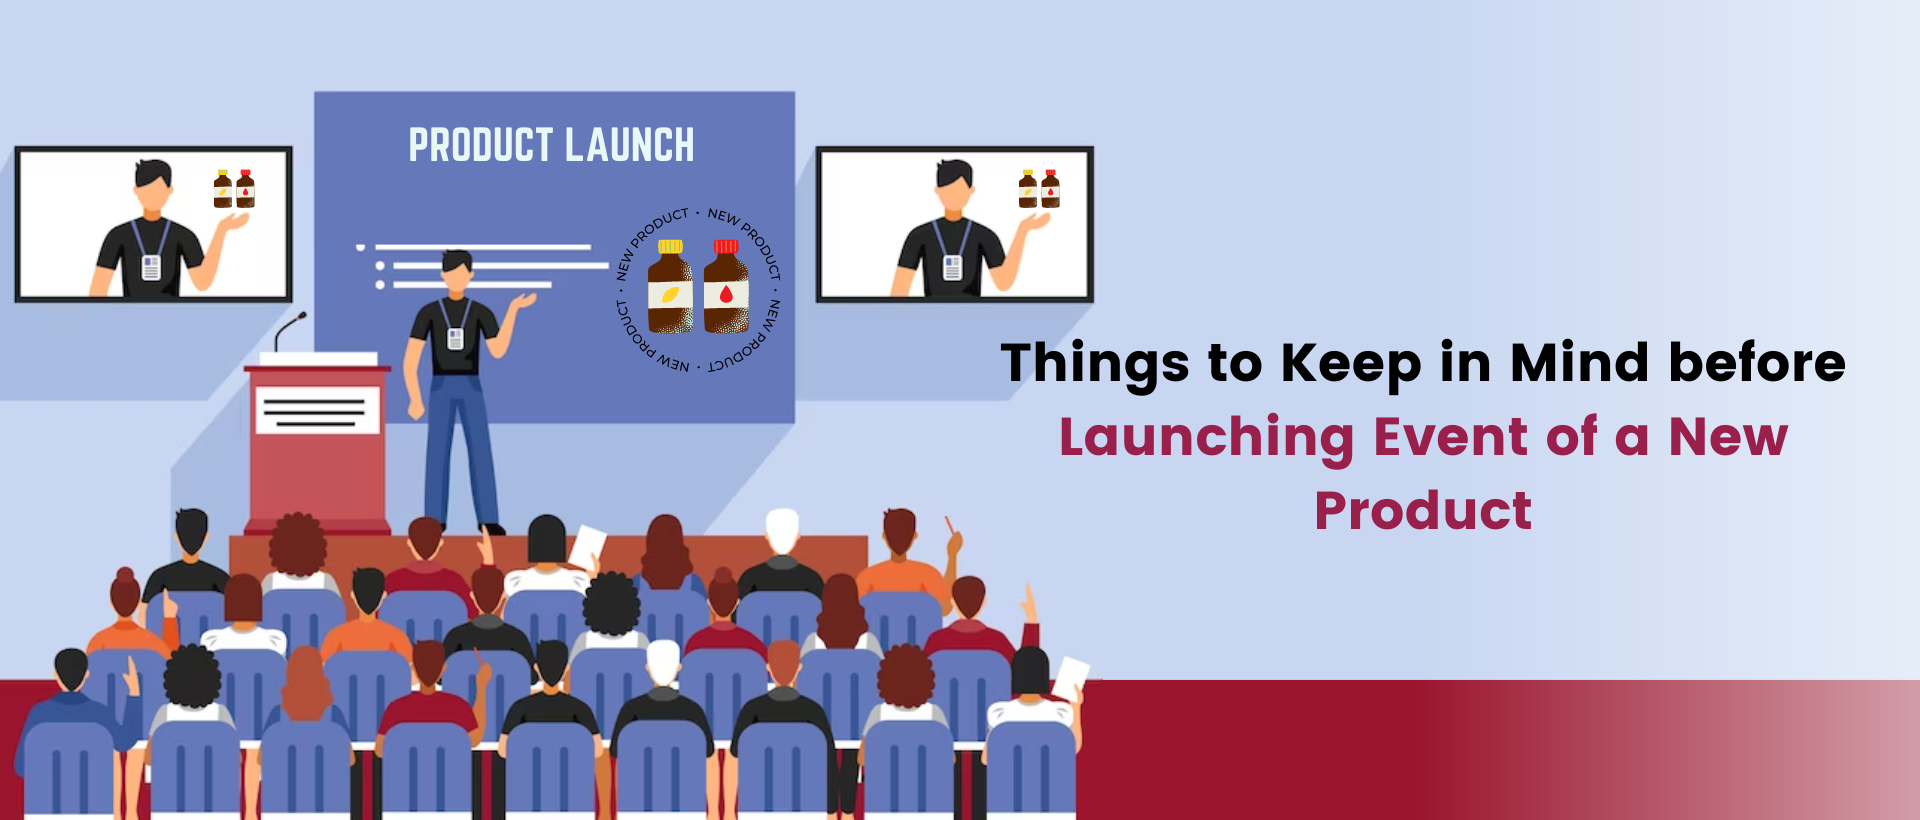 Things to keep in mind before launching event of a new product